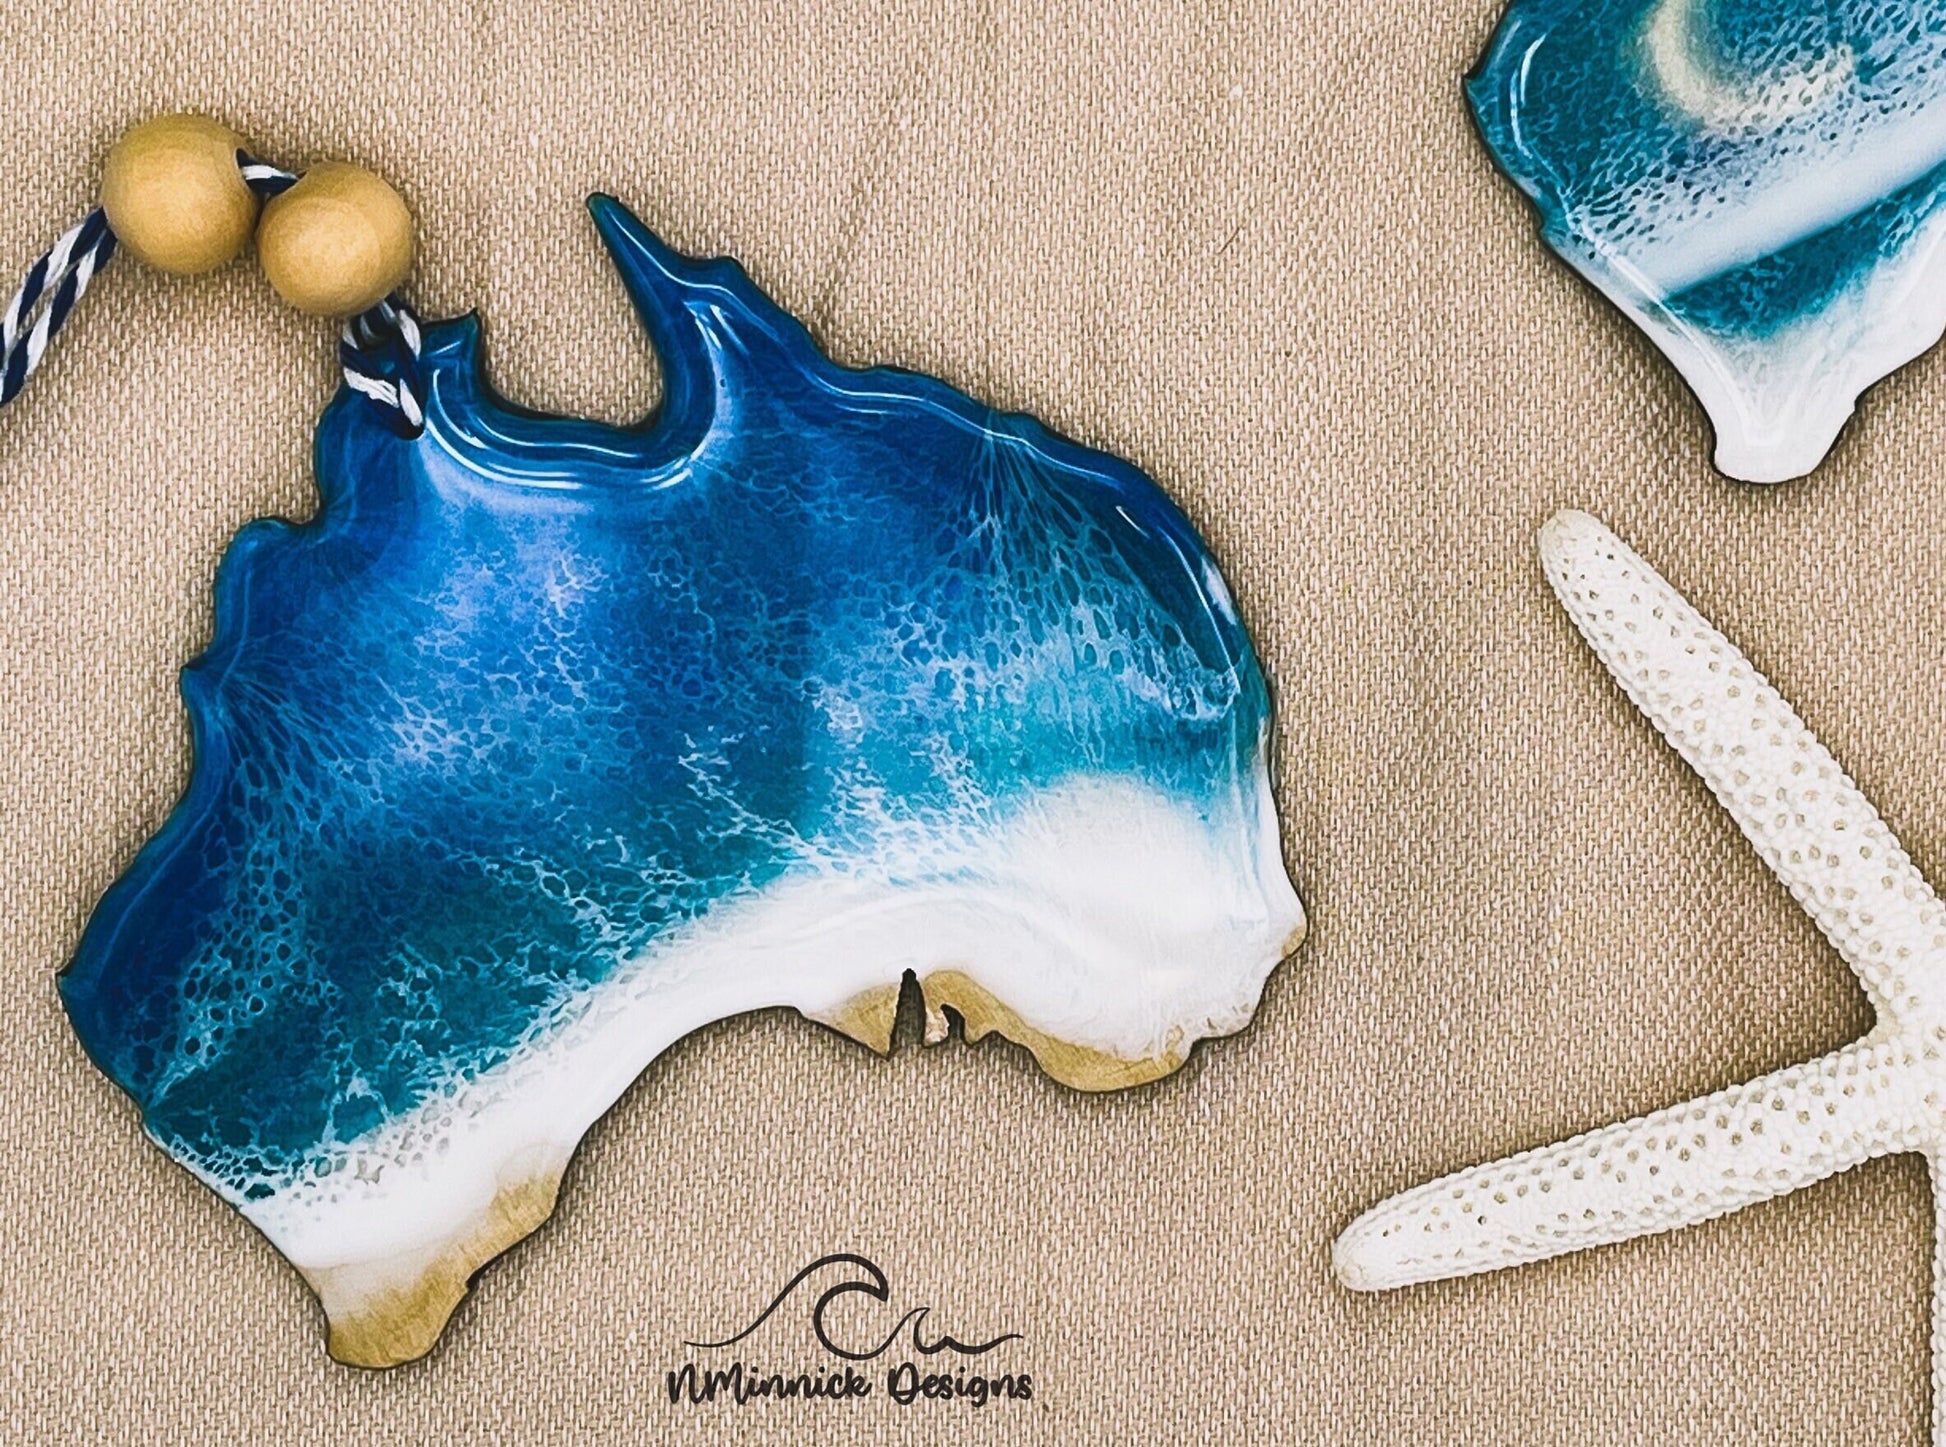 Australia-shaped wooden Christmas ornament covered in blue and teal ocean resin art resembling the waves of the Sunshine Coast. Finished with blue and white baker&#39;s twine and two wooden beads.